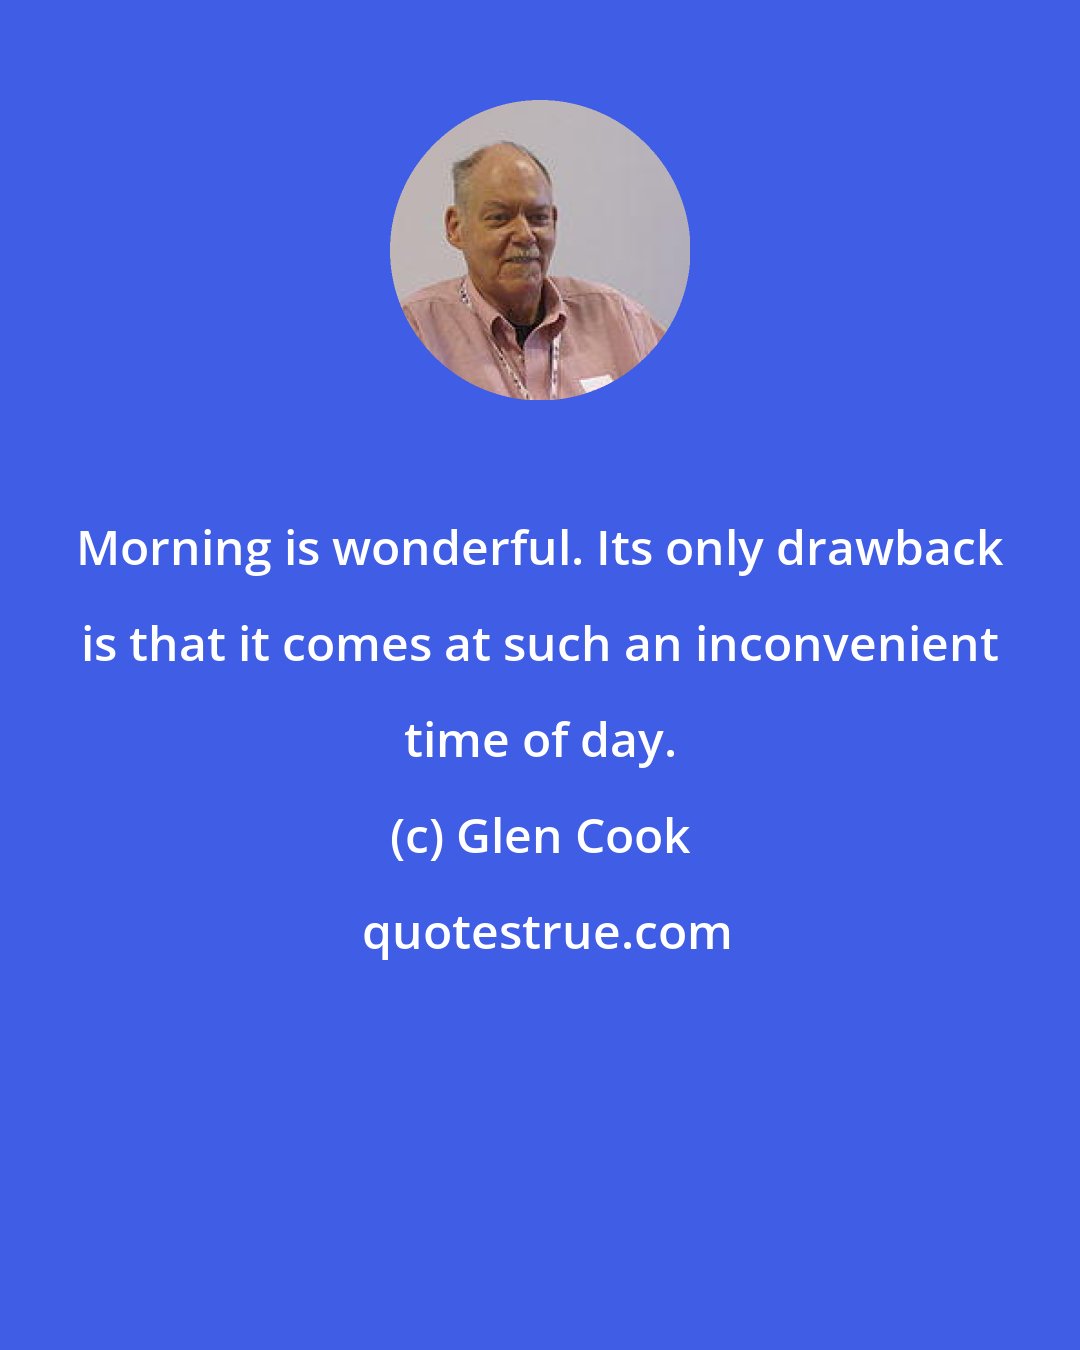 Glen Cook: Morning is wonderful. Its only drawback is that it comes at such an inconvenient time of day.